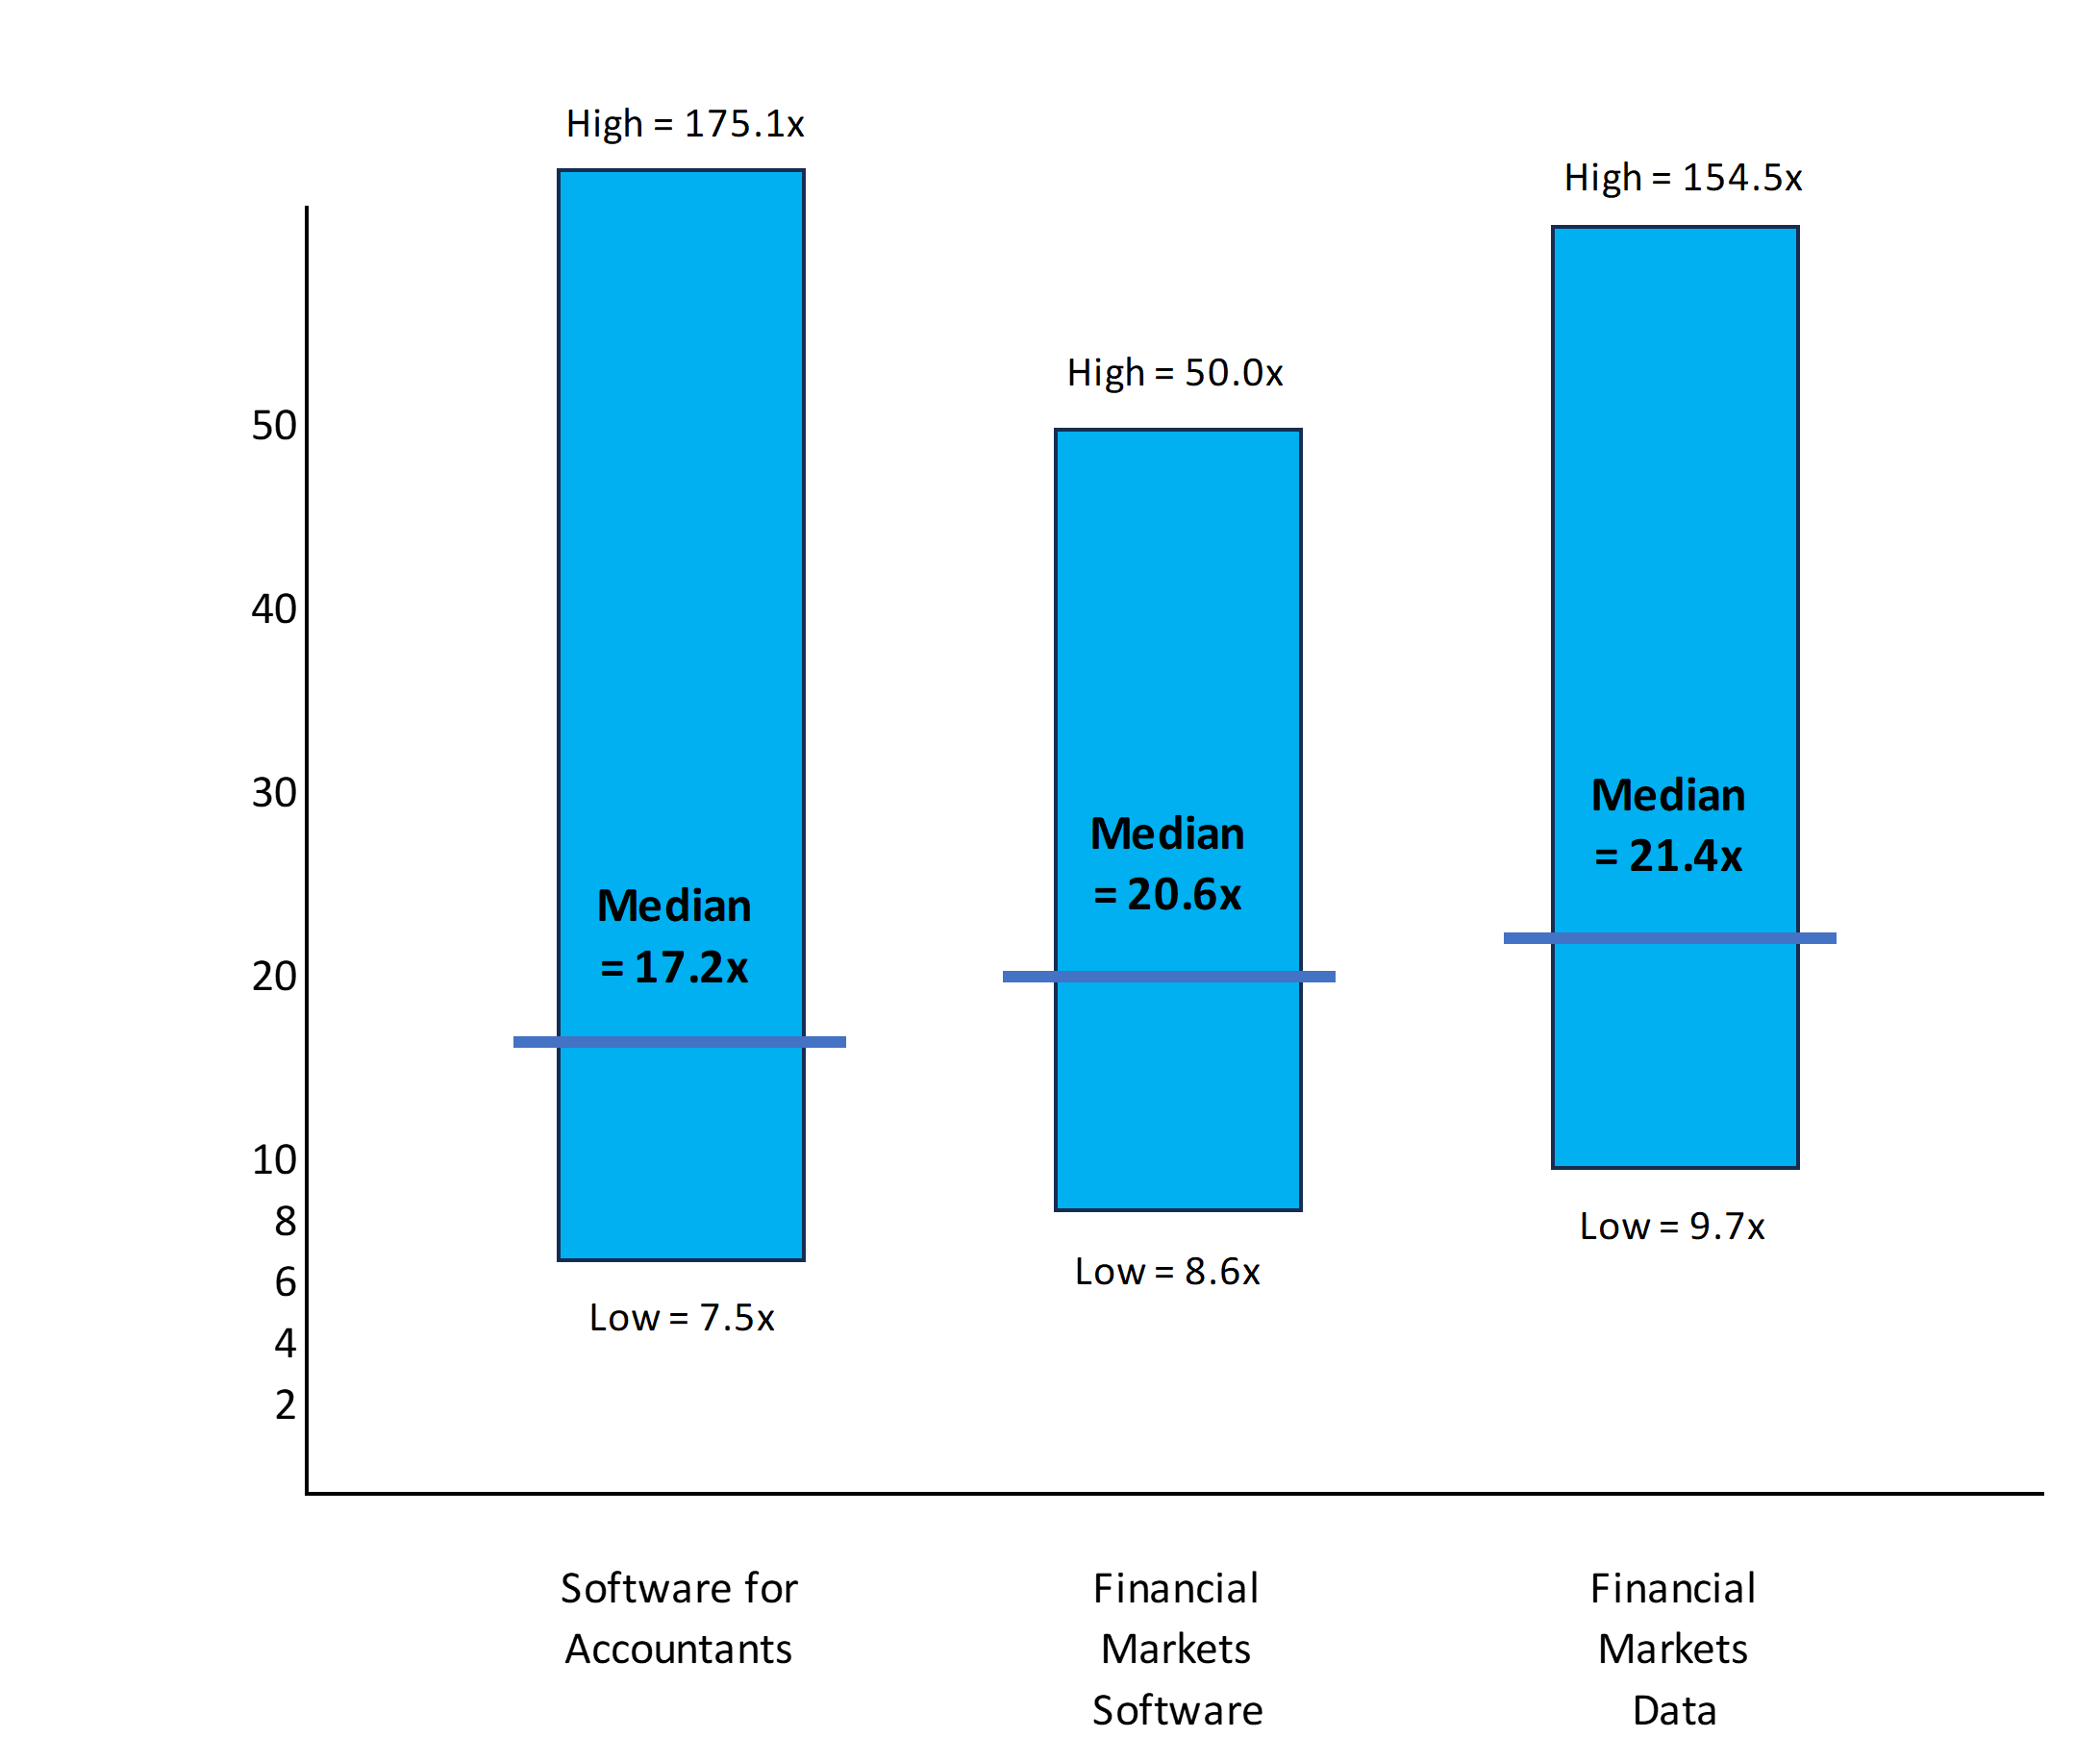 A bar chart showing the EBITDA Multiple Range with mediums for: Software for Accountants at 17.2x, Financial Markets Software at 20.6x and Financial Markets Data at 21.4x.